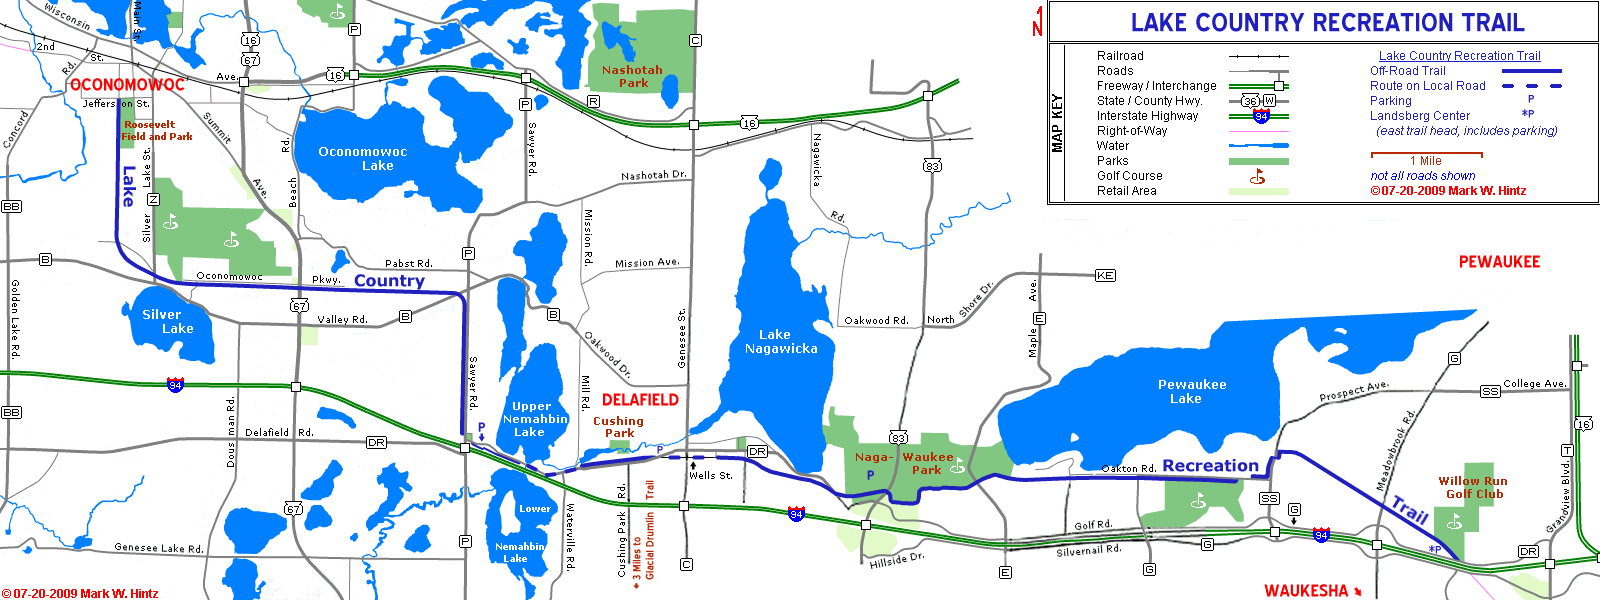 Lake Country Recreation Trail map